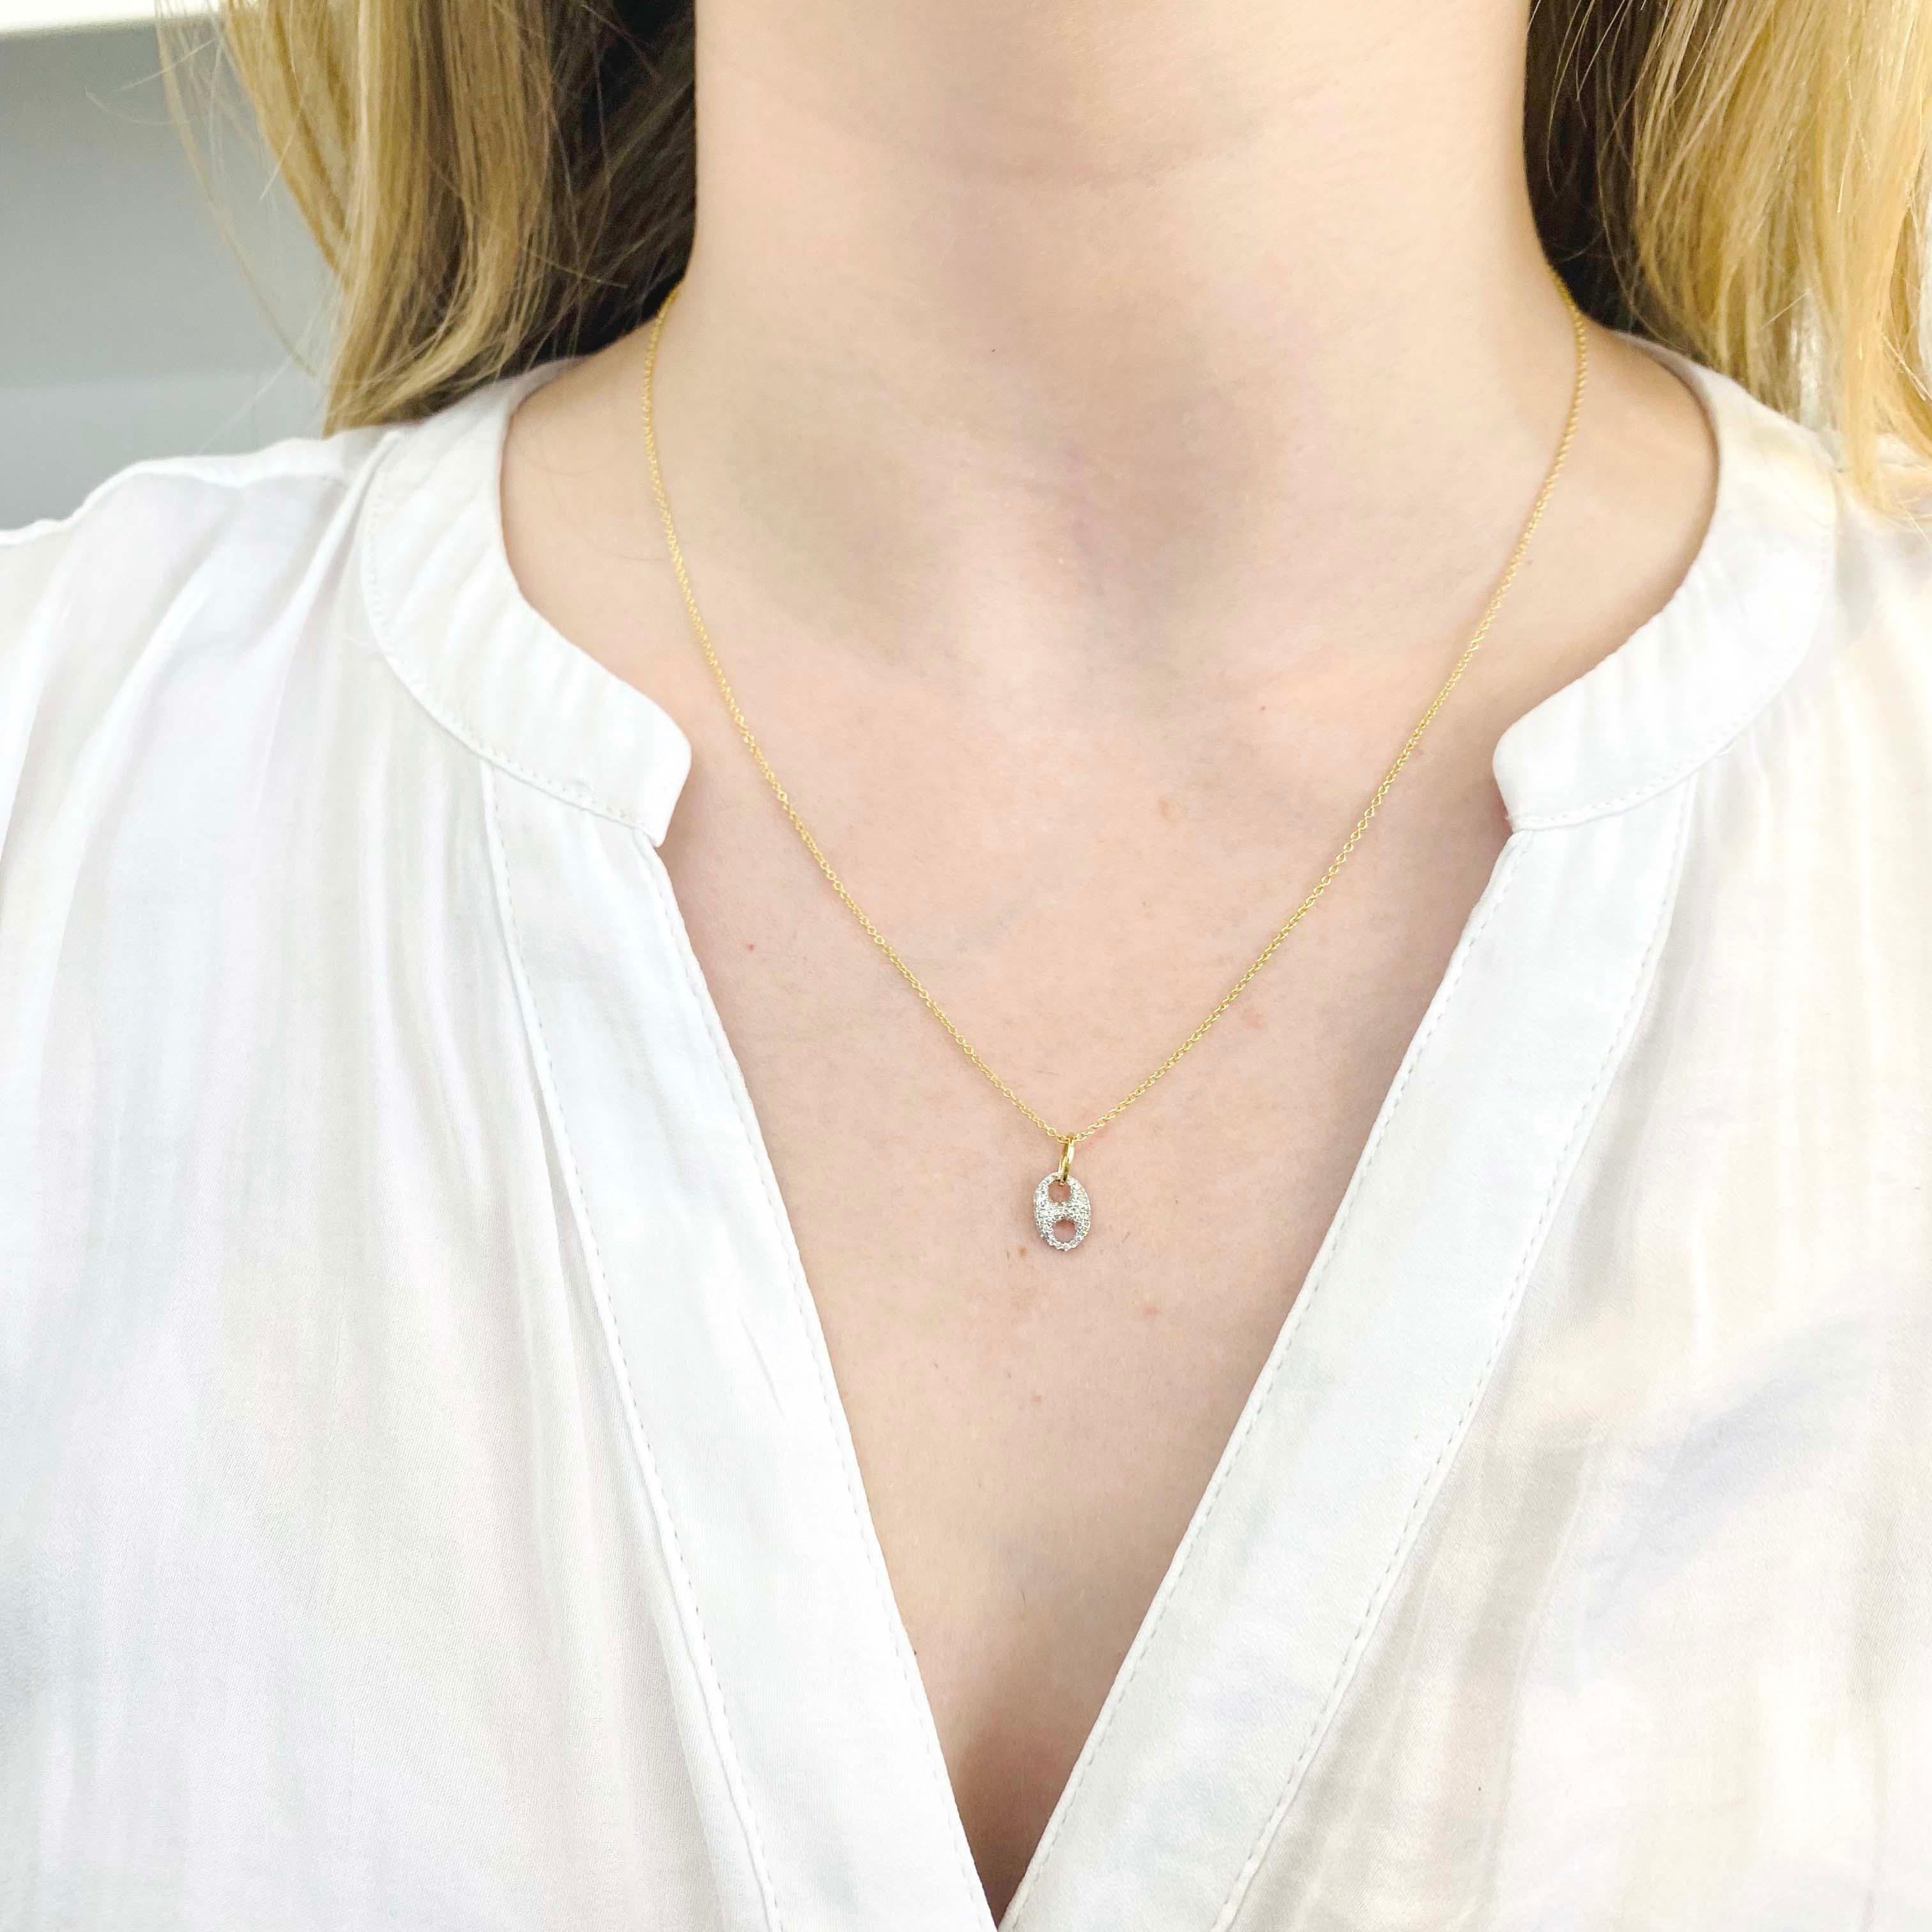 This new design can enhance any outfit. The necklace works great with other necklaces, and since it has mixed metals, it looks beautiful with white to yellow gold. Its simple look also can create a dainty look on its own. The details for this